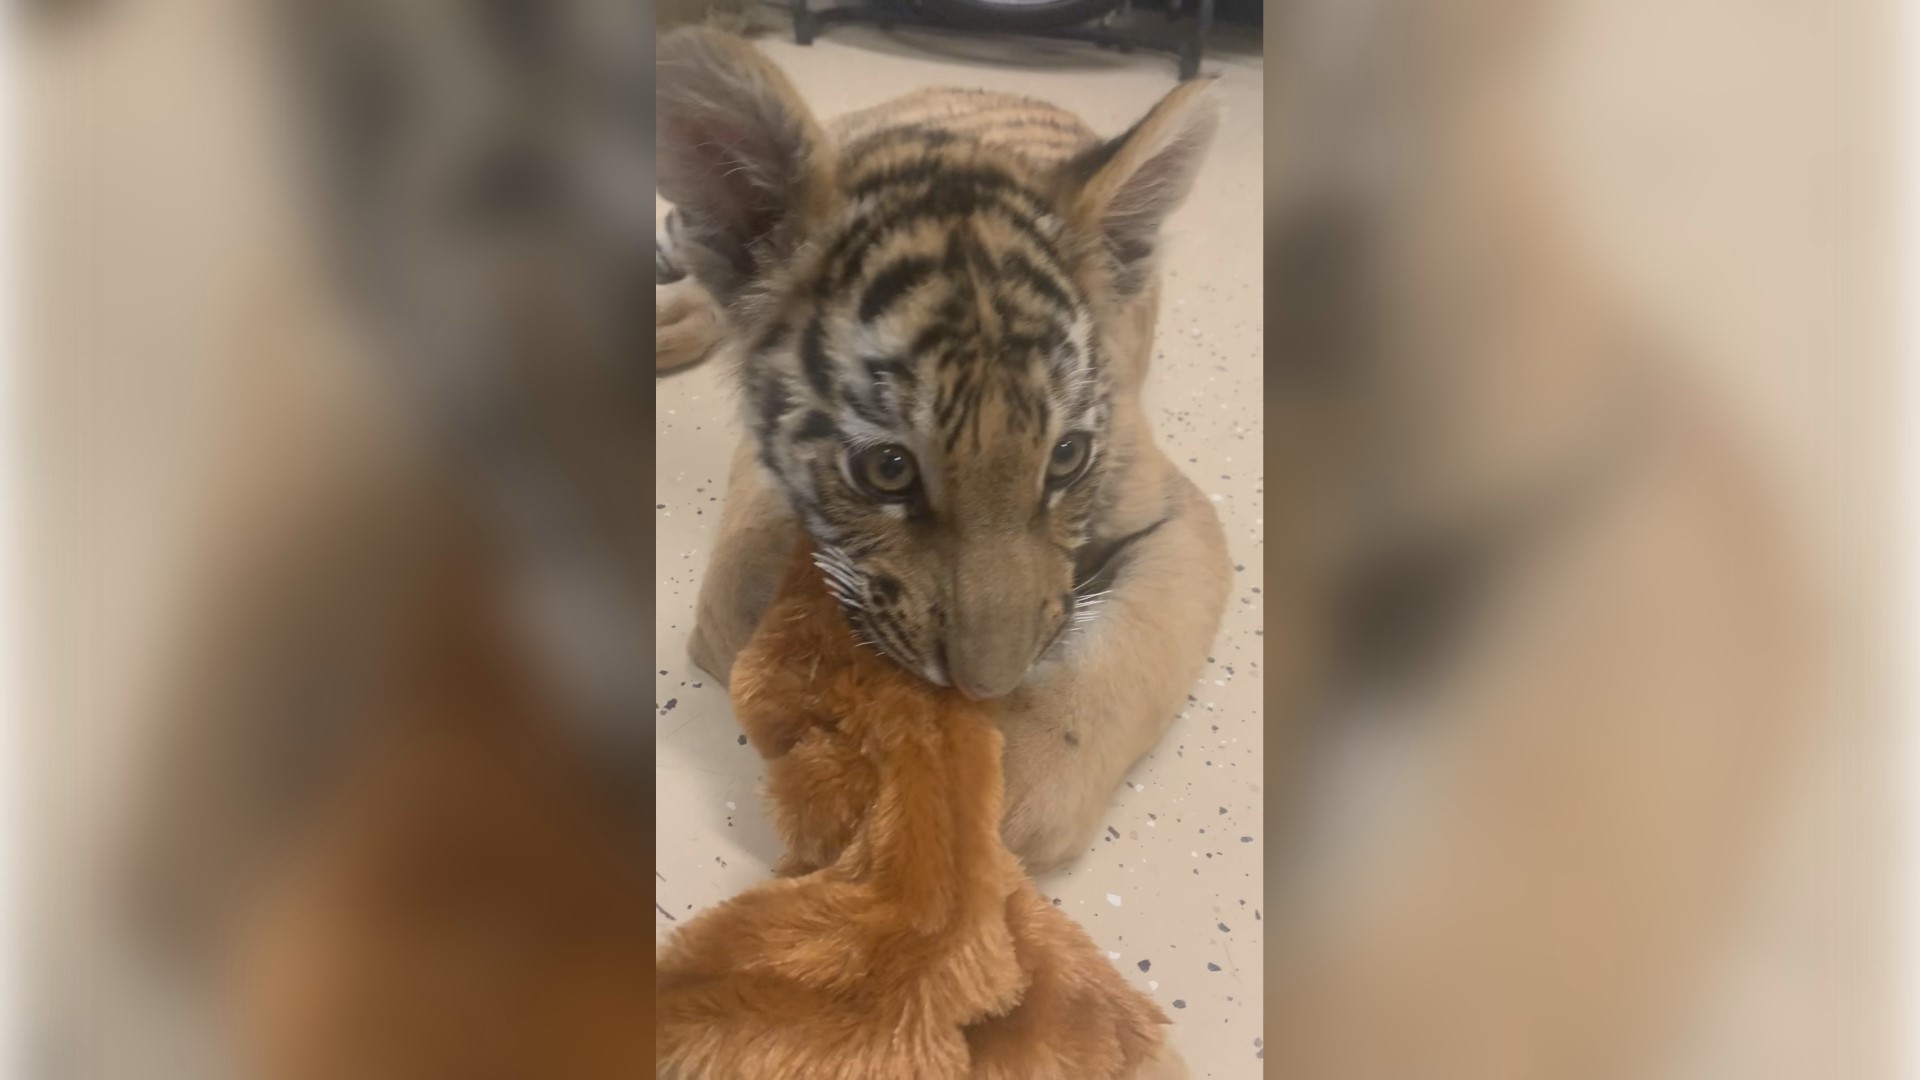 Southwest Wildlife Conservation Center officials said the cub now lives in a special enclosure in Scottsdale, where she is getting the care it needs.